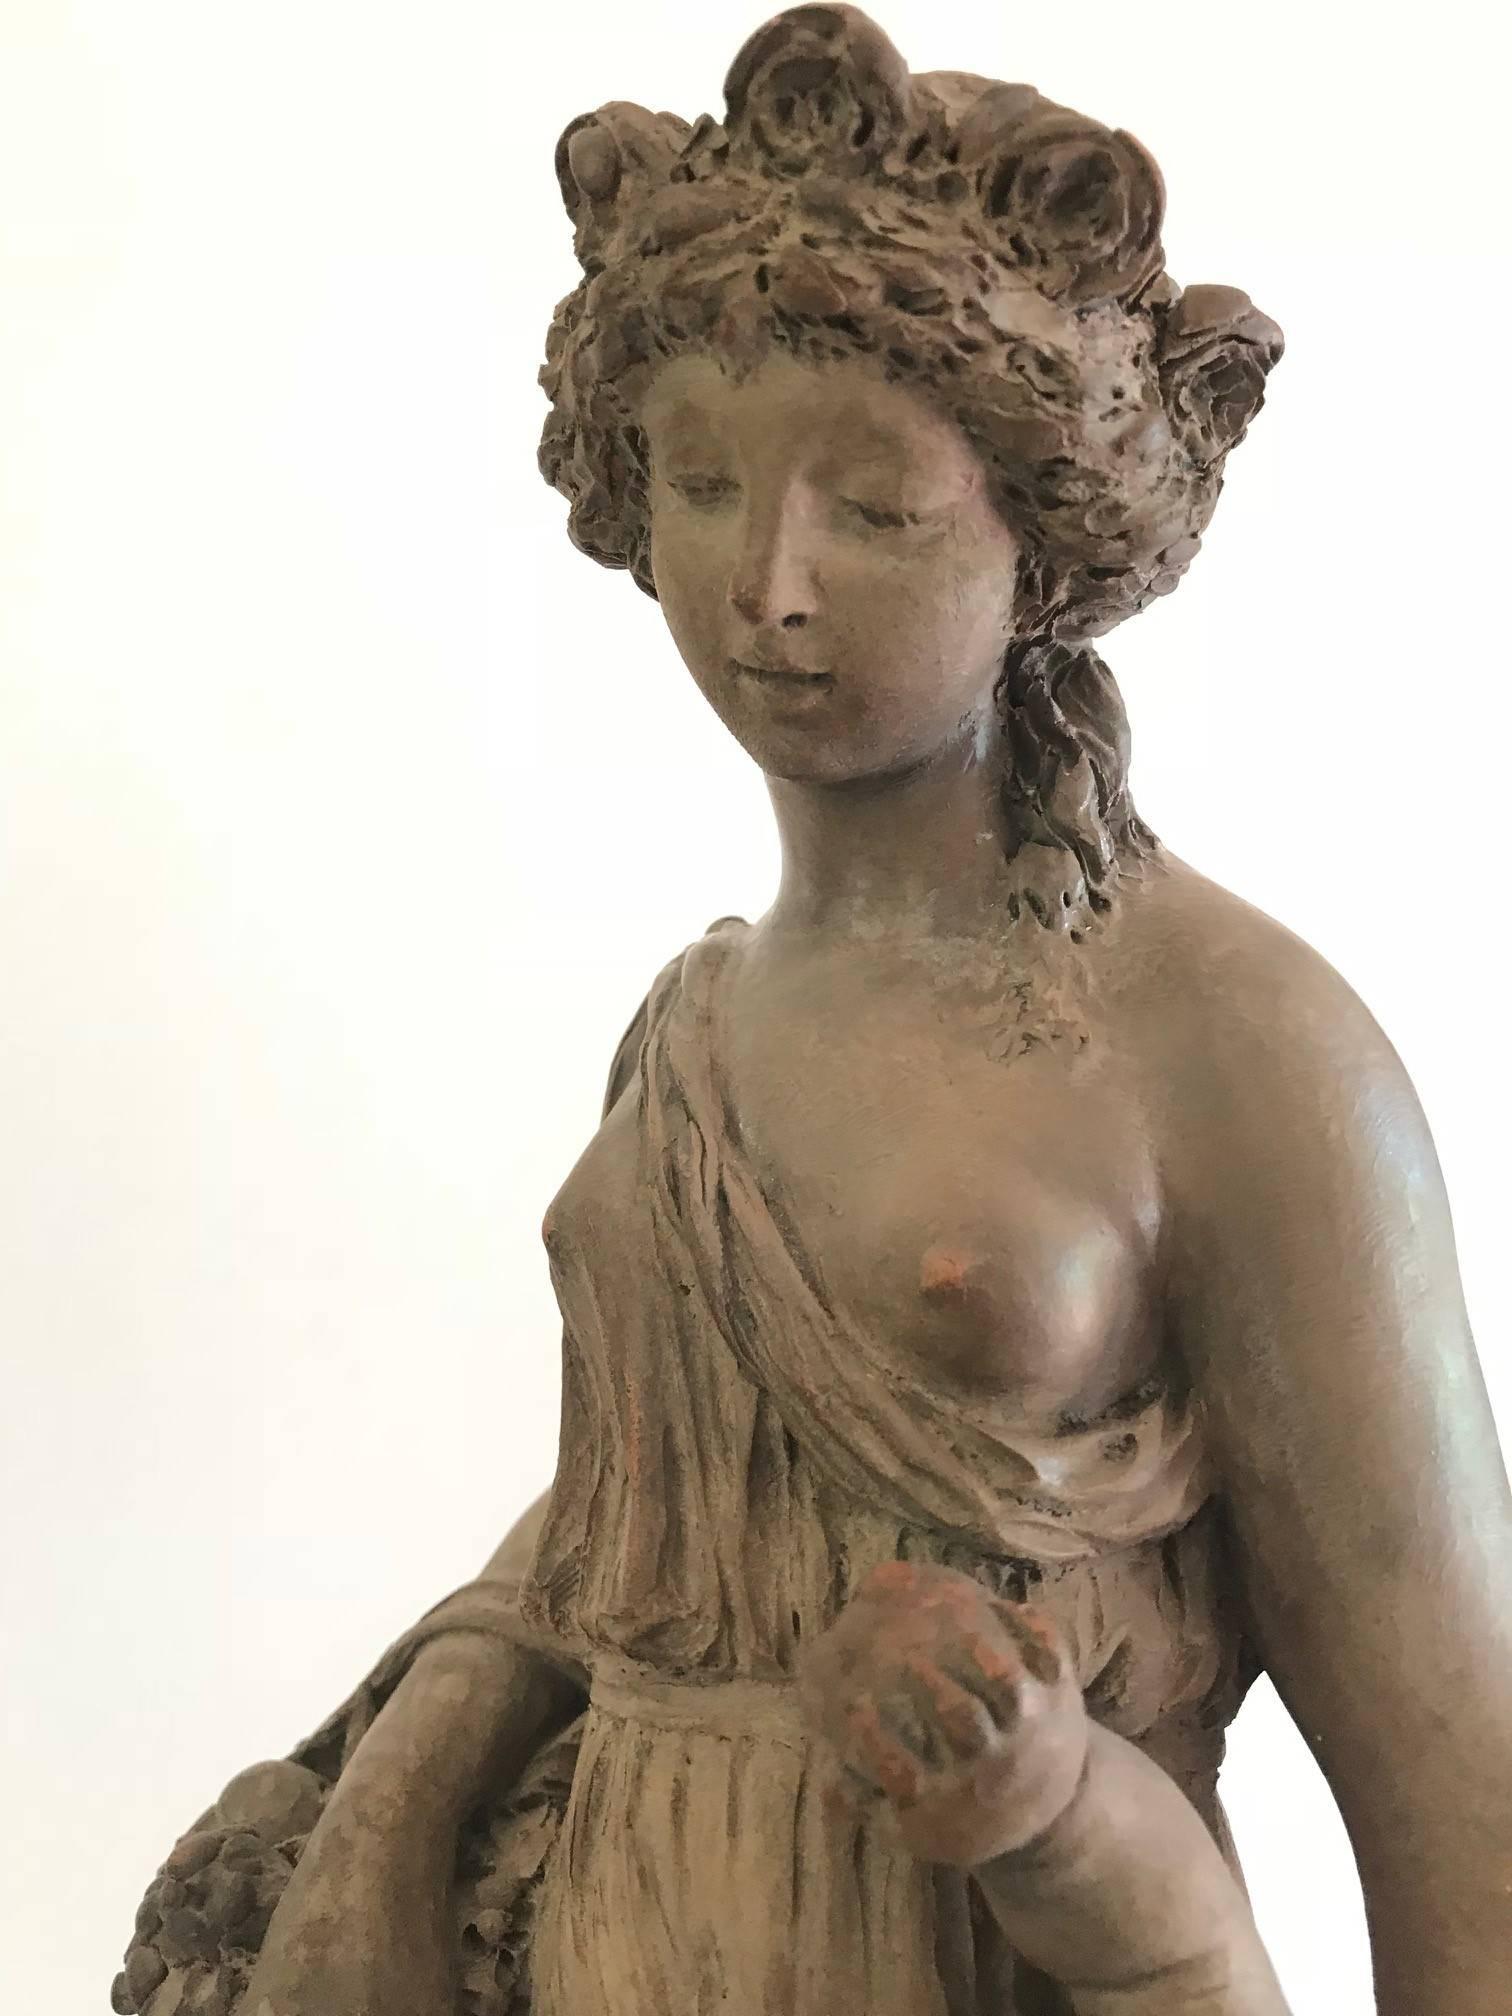 Charming and expressive terracotta sculpture  of a young maiden and child,  after Claude Michel Clodion ( 1738-1814) .
Clodion was one of the most esteemed sculptors of the 18th century. He worked frequently with terracotta, or baked clay,  highly